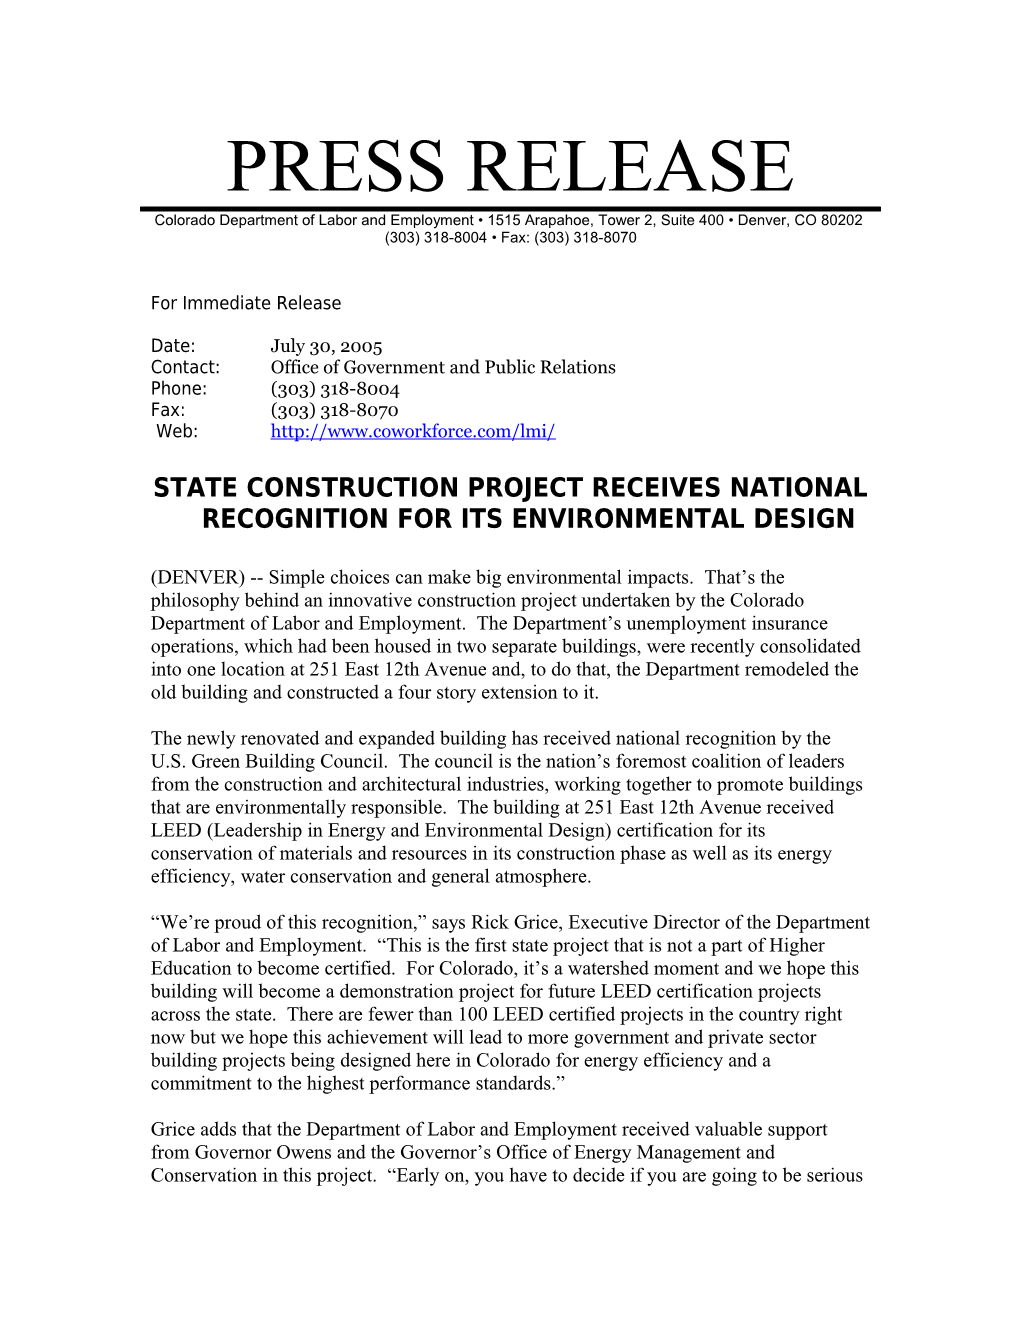 State Construction Project Receives National Recognition for Its Environmental Design